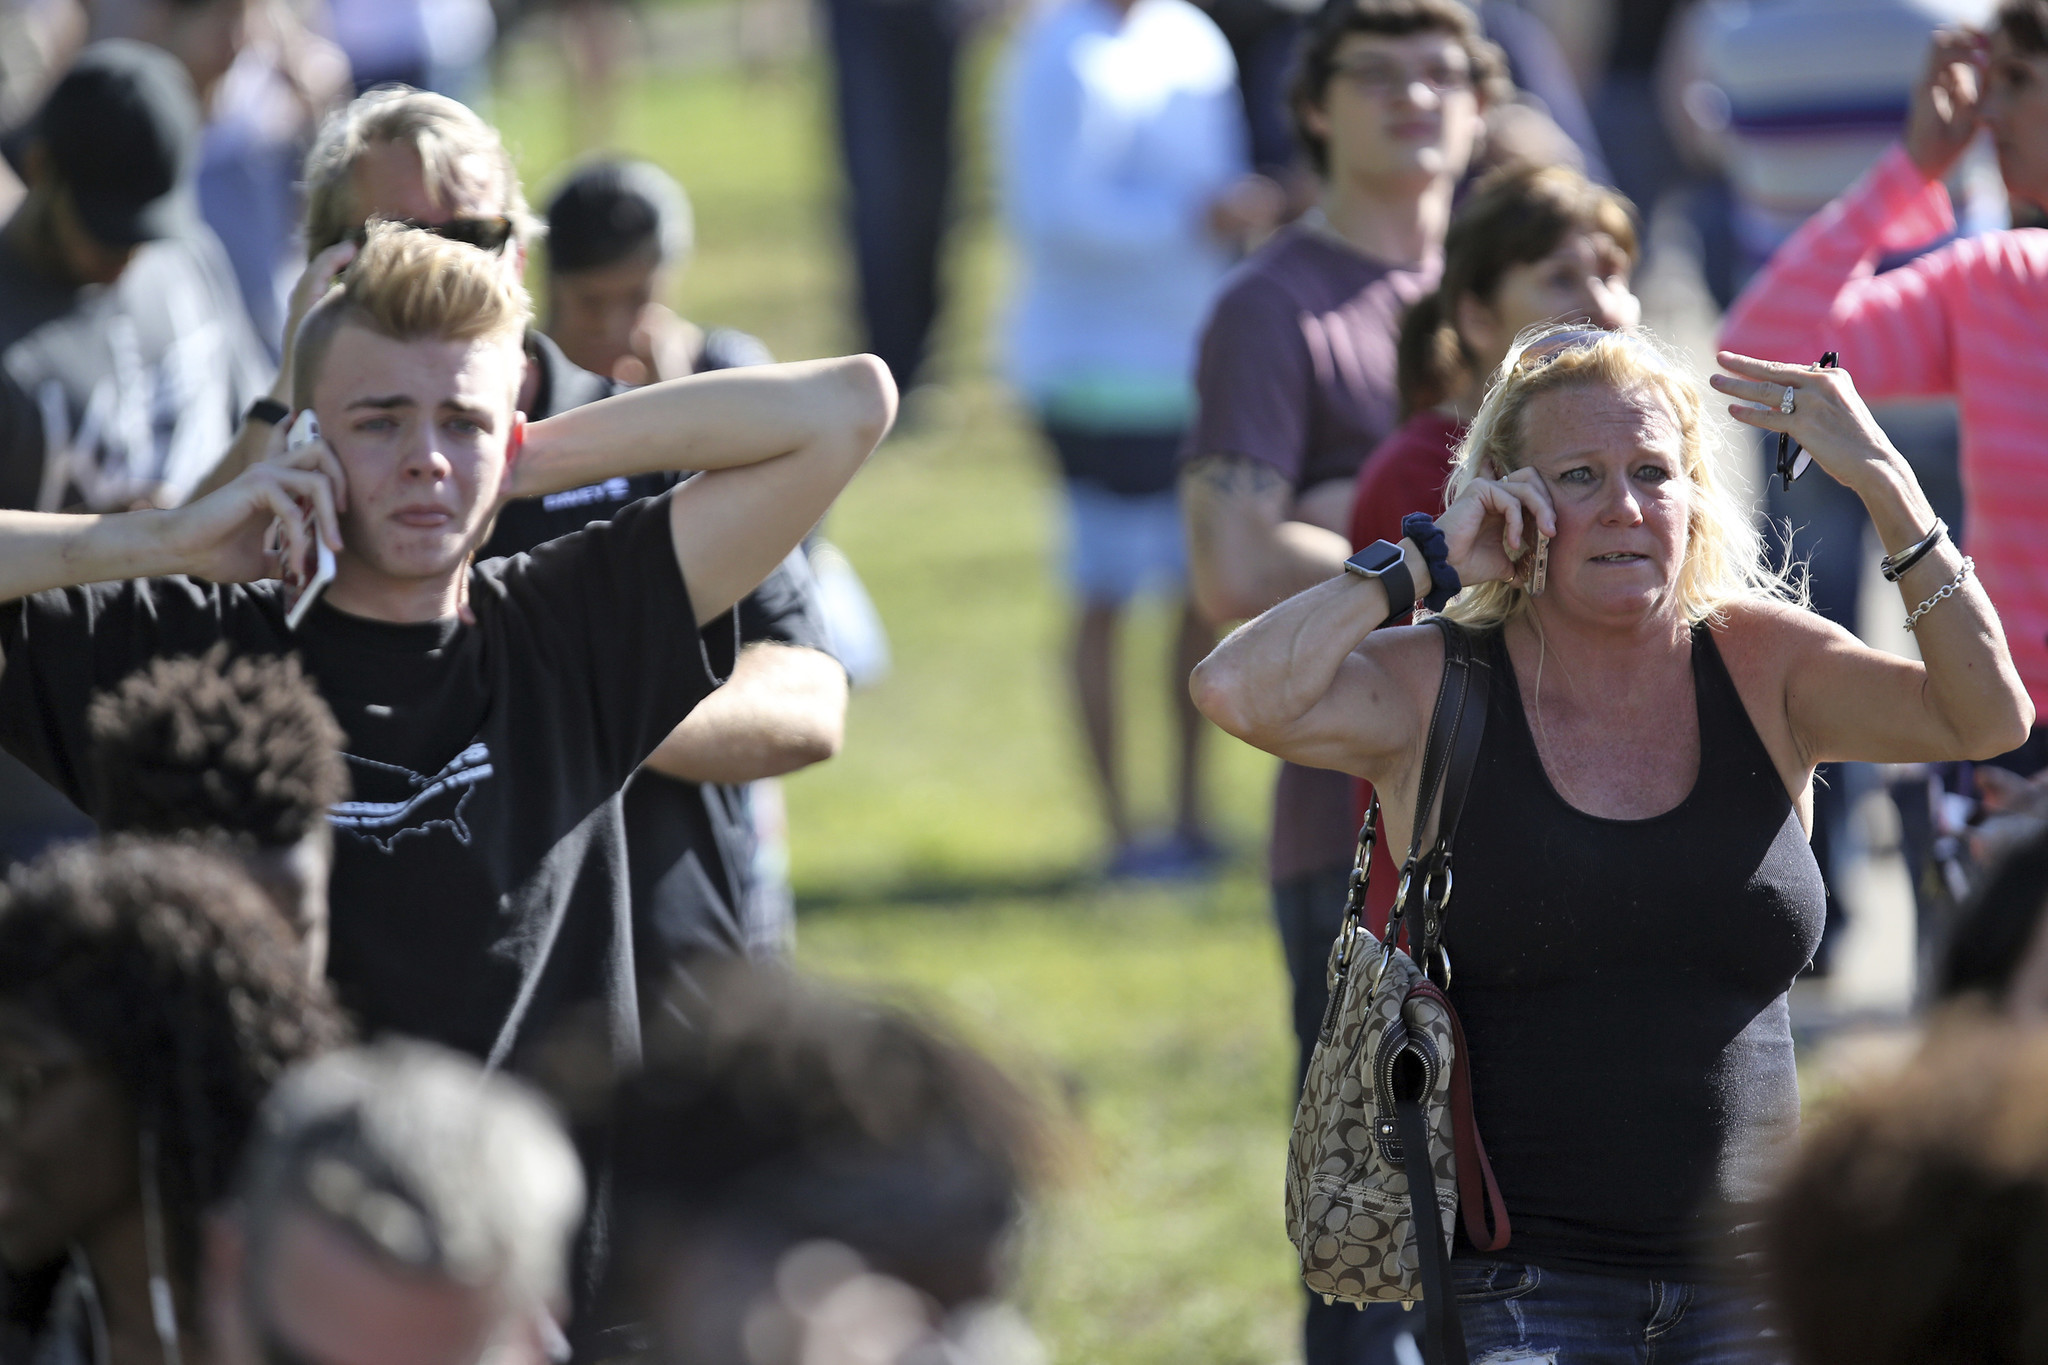 This is how common school shootings are in America